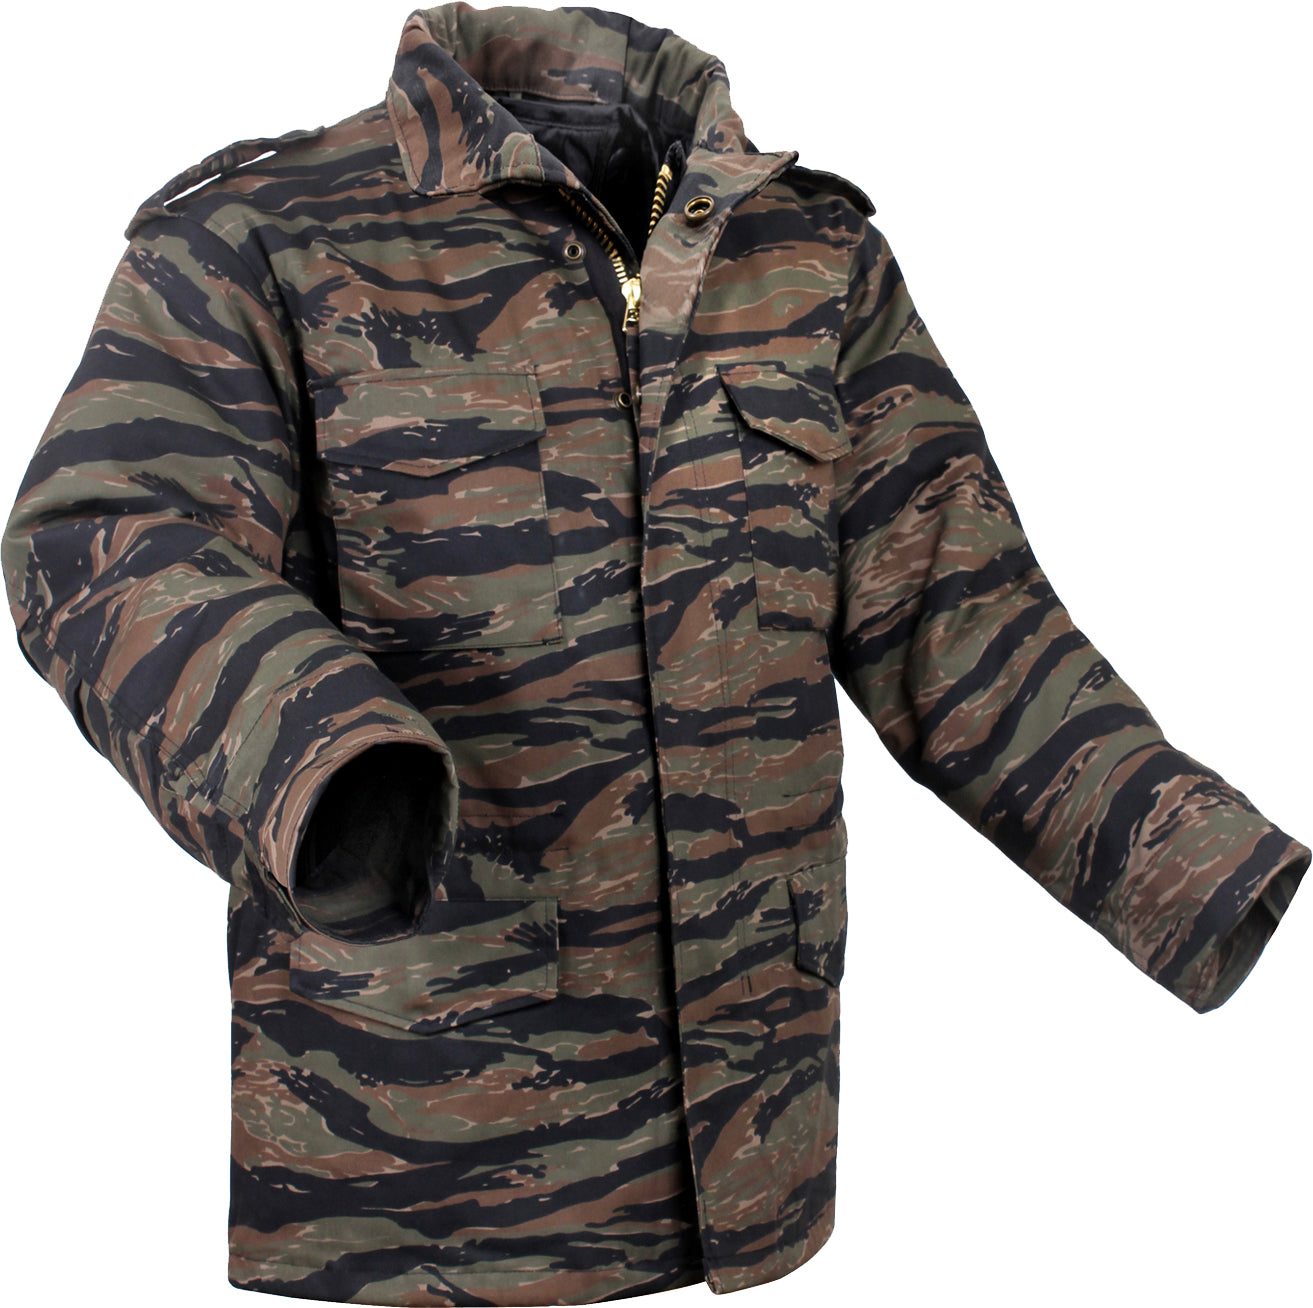 Tiger Stripe Camouflage - Military M-65 Field Jacket Tactical Army M1965 Coat